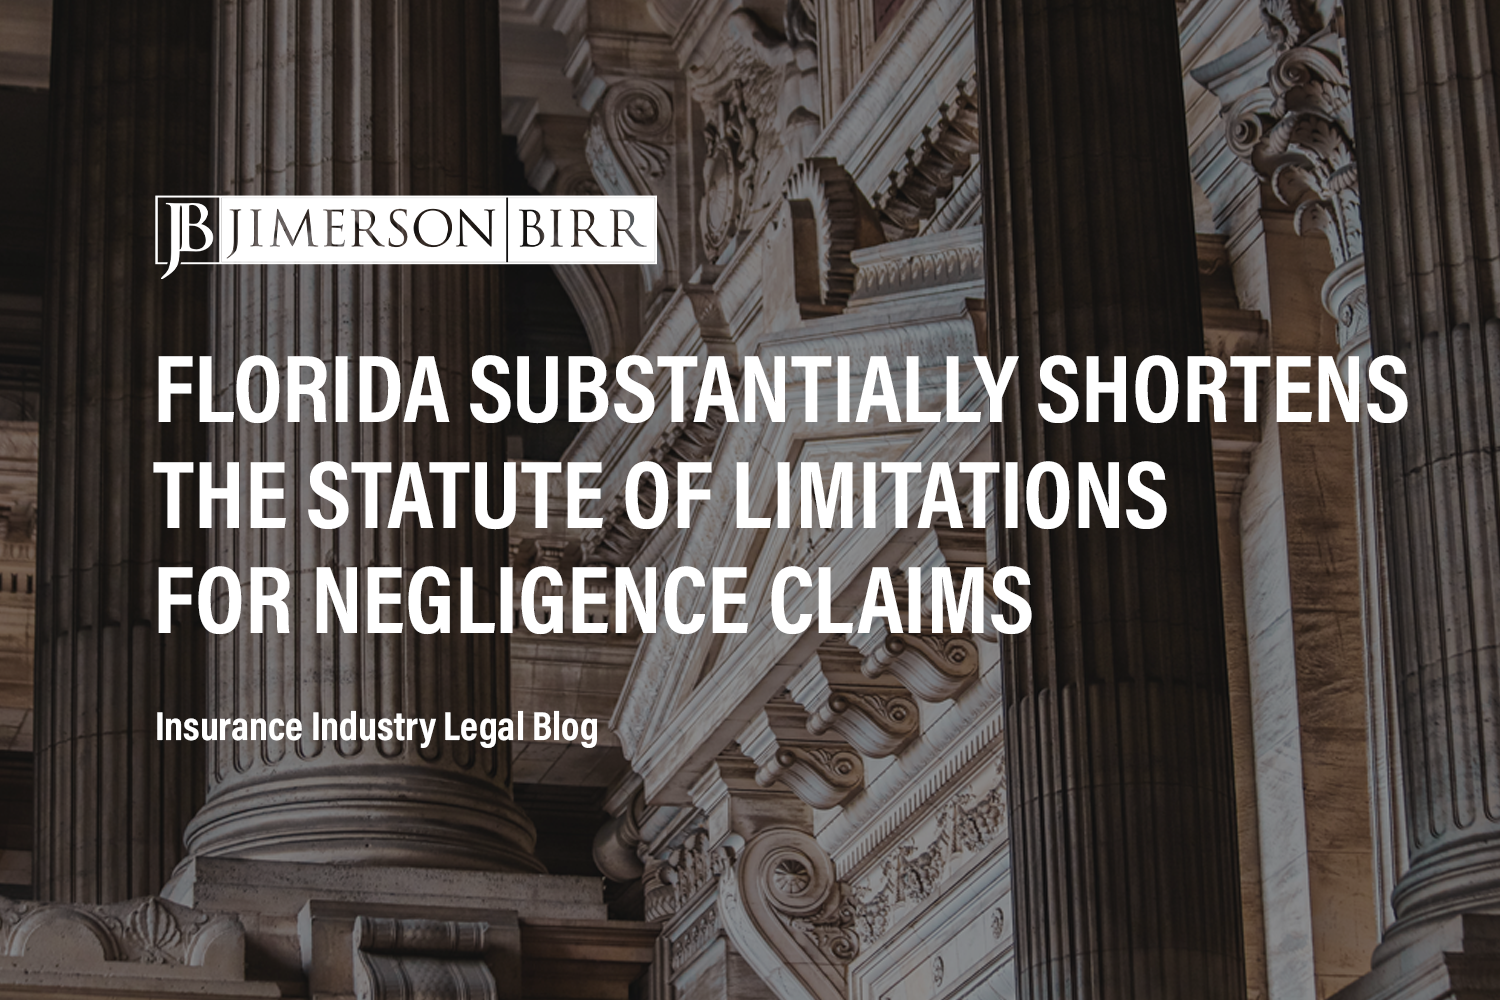 Florida Substantially Shortens the Statute of Limitations for Negligence Claims